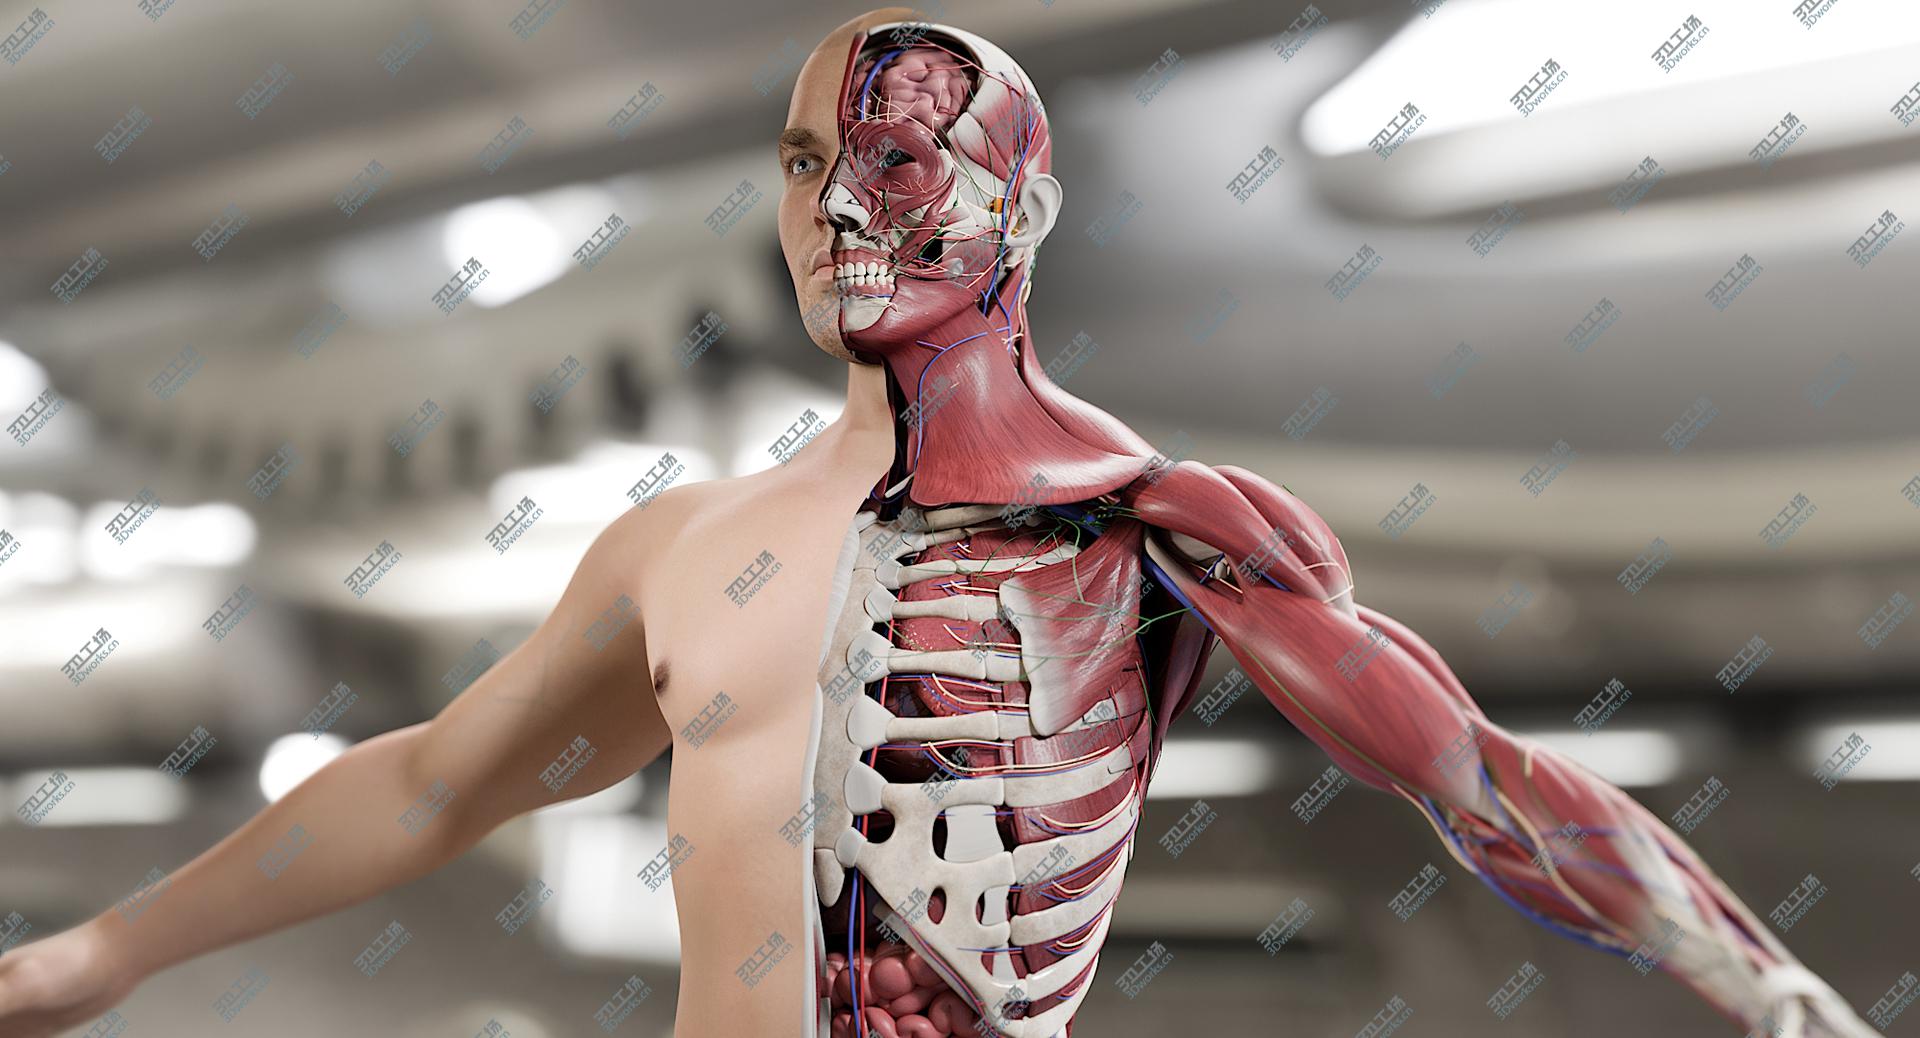 images/goods_img/20210113/3D Male Complete Anatomy/2.jpg